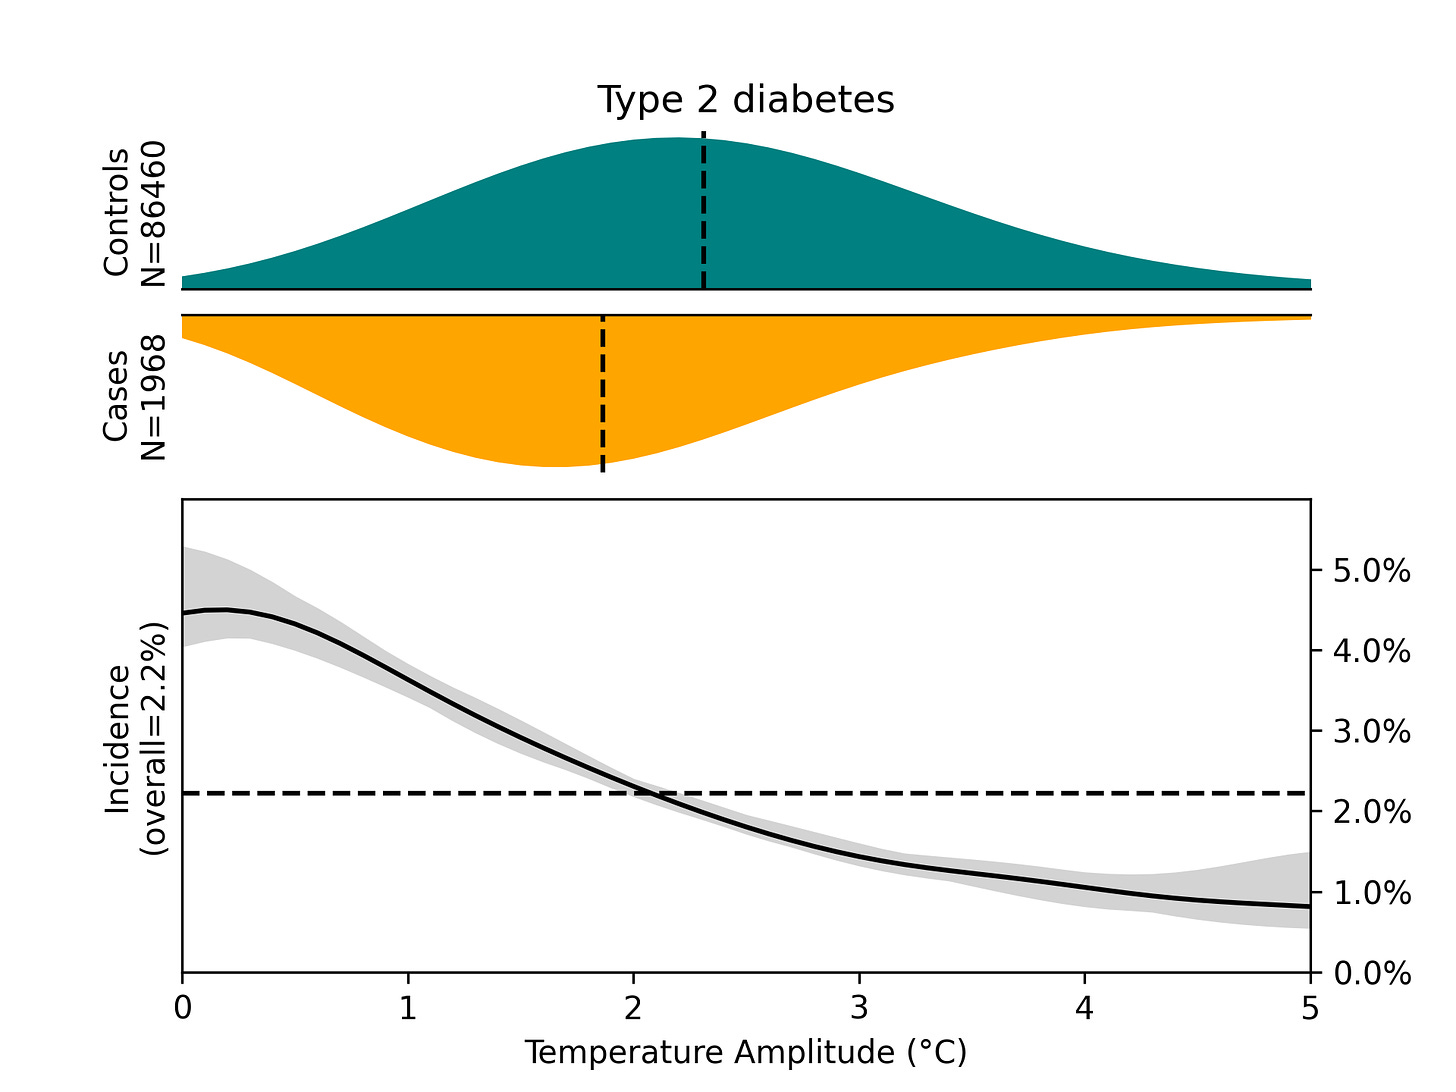 risk of Type 2 diabetes stratified by the temperature amplitude across the population (without controlling for other factors, such as sex or age).